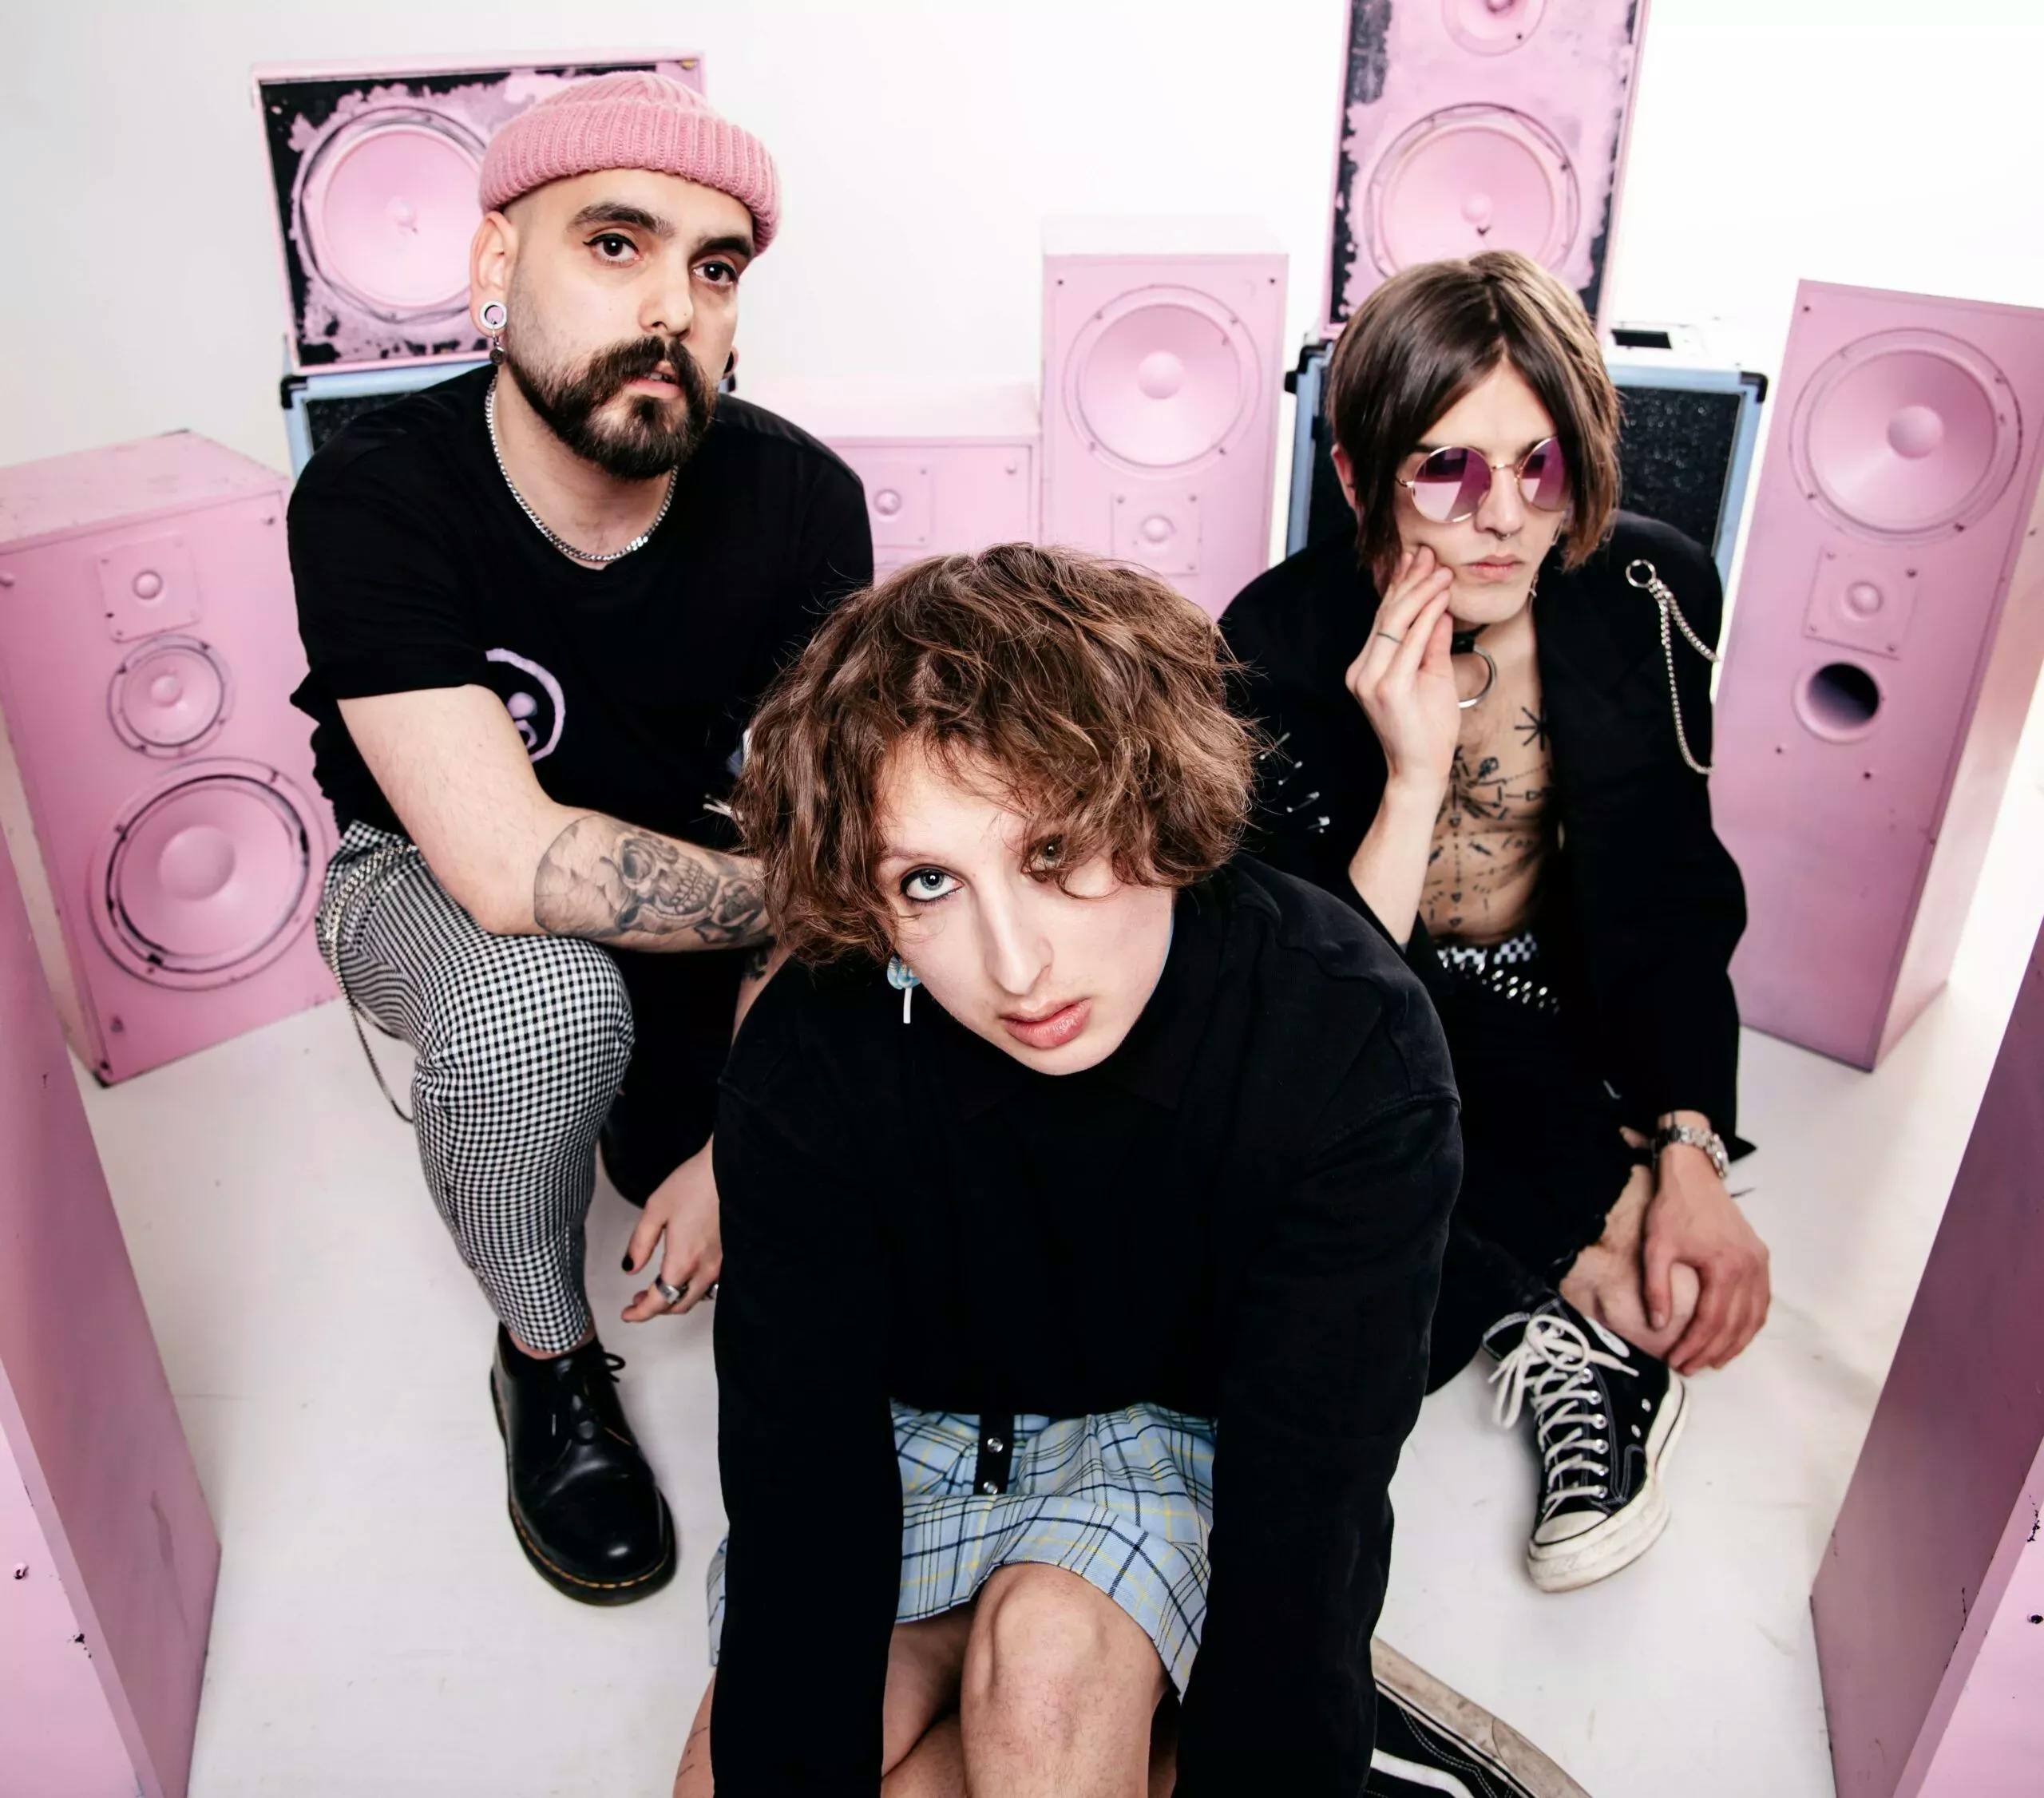 Music group Tribe Friday, lead singer Noah Deutschmann in the middle, guitarist Isak Gunnarsson on the right, and bassist Robin Hanberger-Pérez on the left with pink speakers in the background